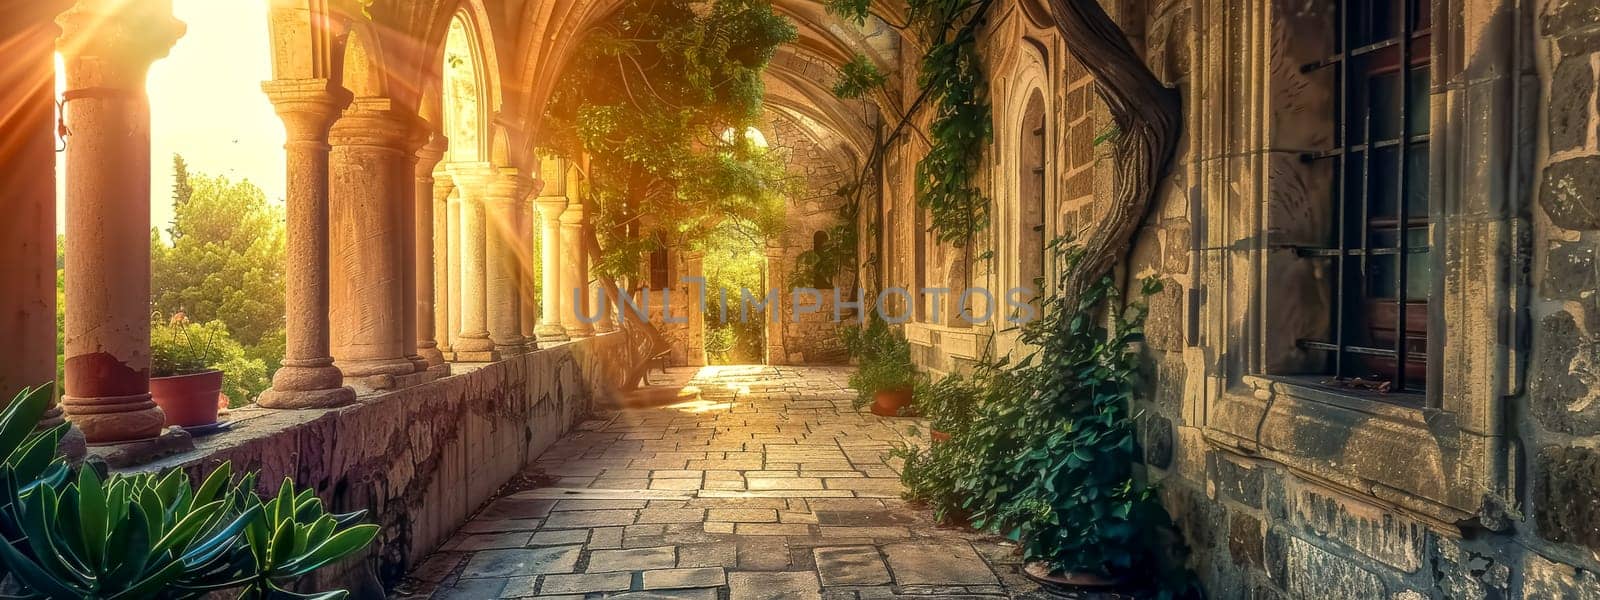 Tranquil sunlit pathway through ancient cloister with historical architecture. Serene greenery. Stone arches. And columns. Creating a peaceful and tranquil walkway in a medieval monastery garden